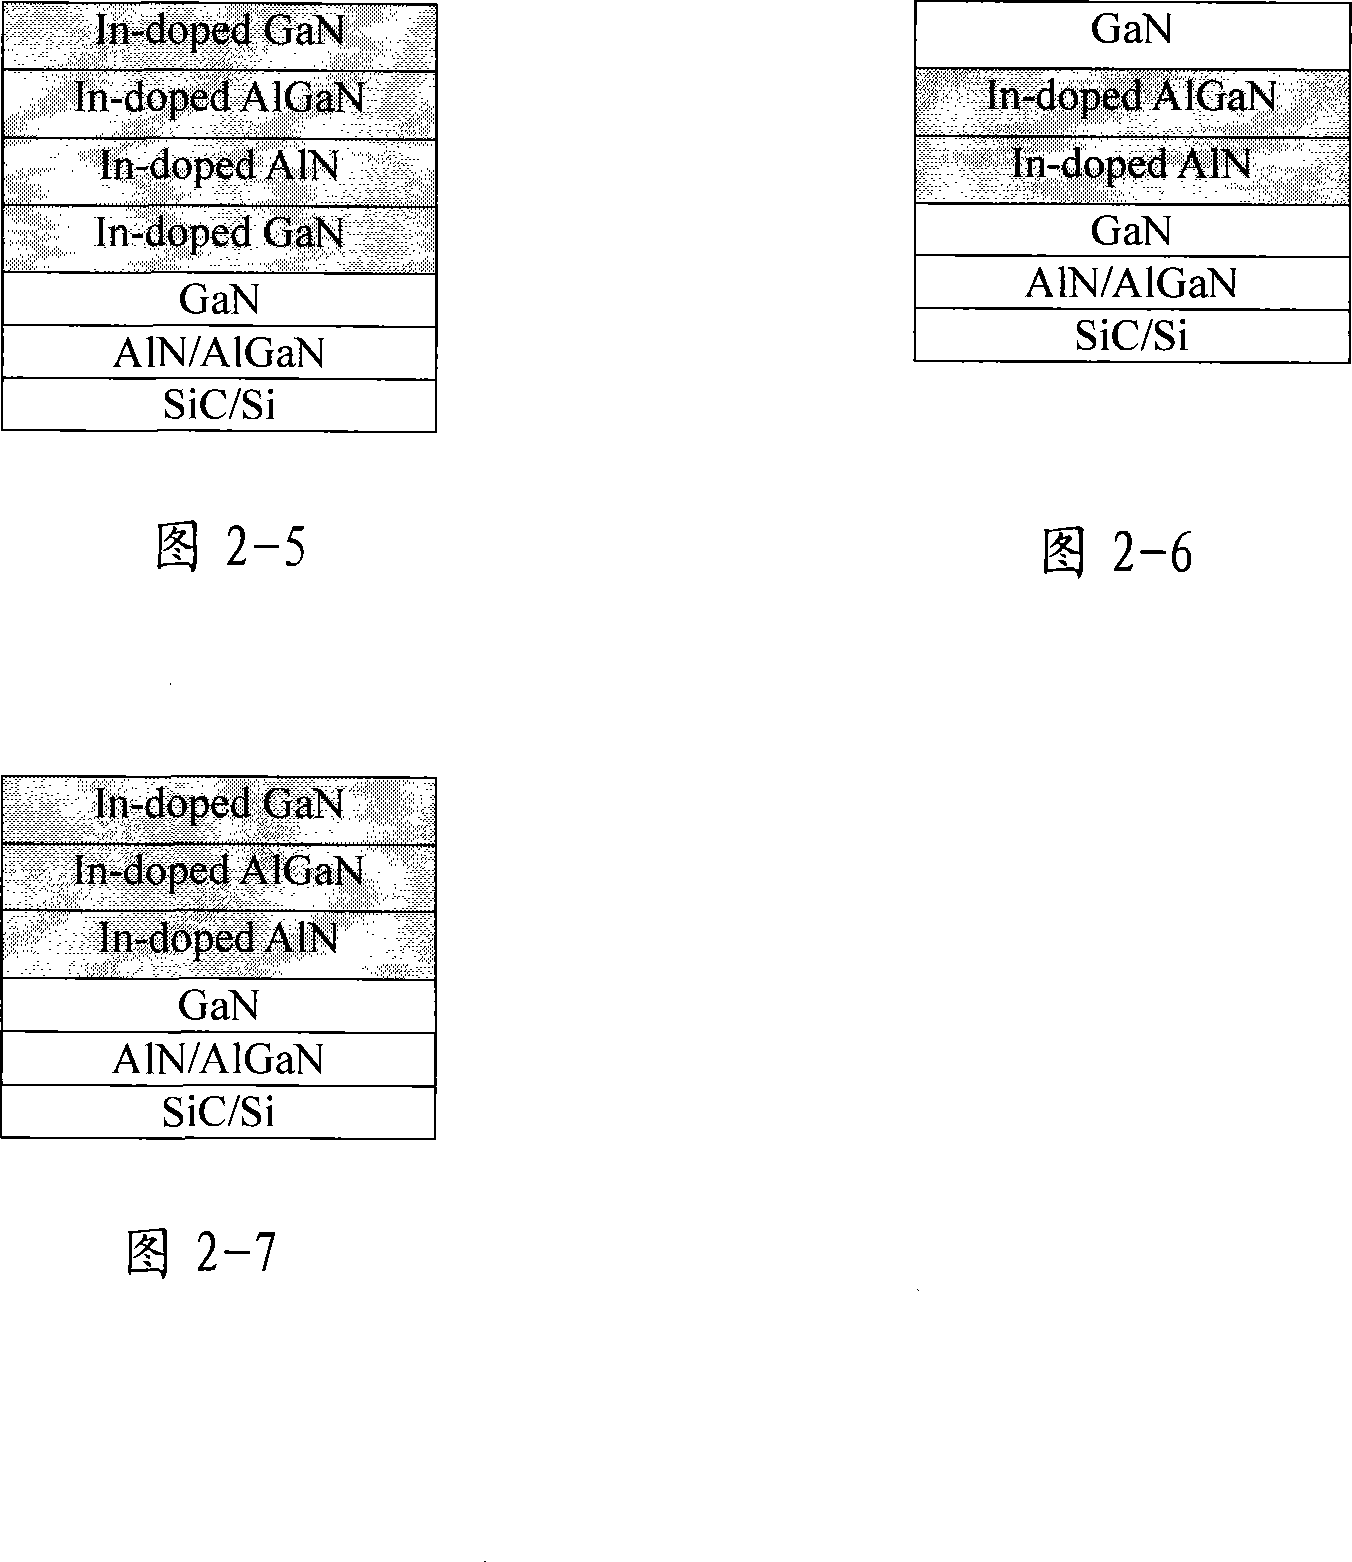 Method for improving gallium nitride based transistor material and device performance using indium doping